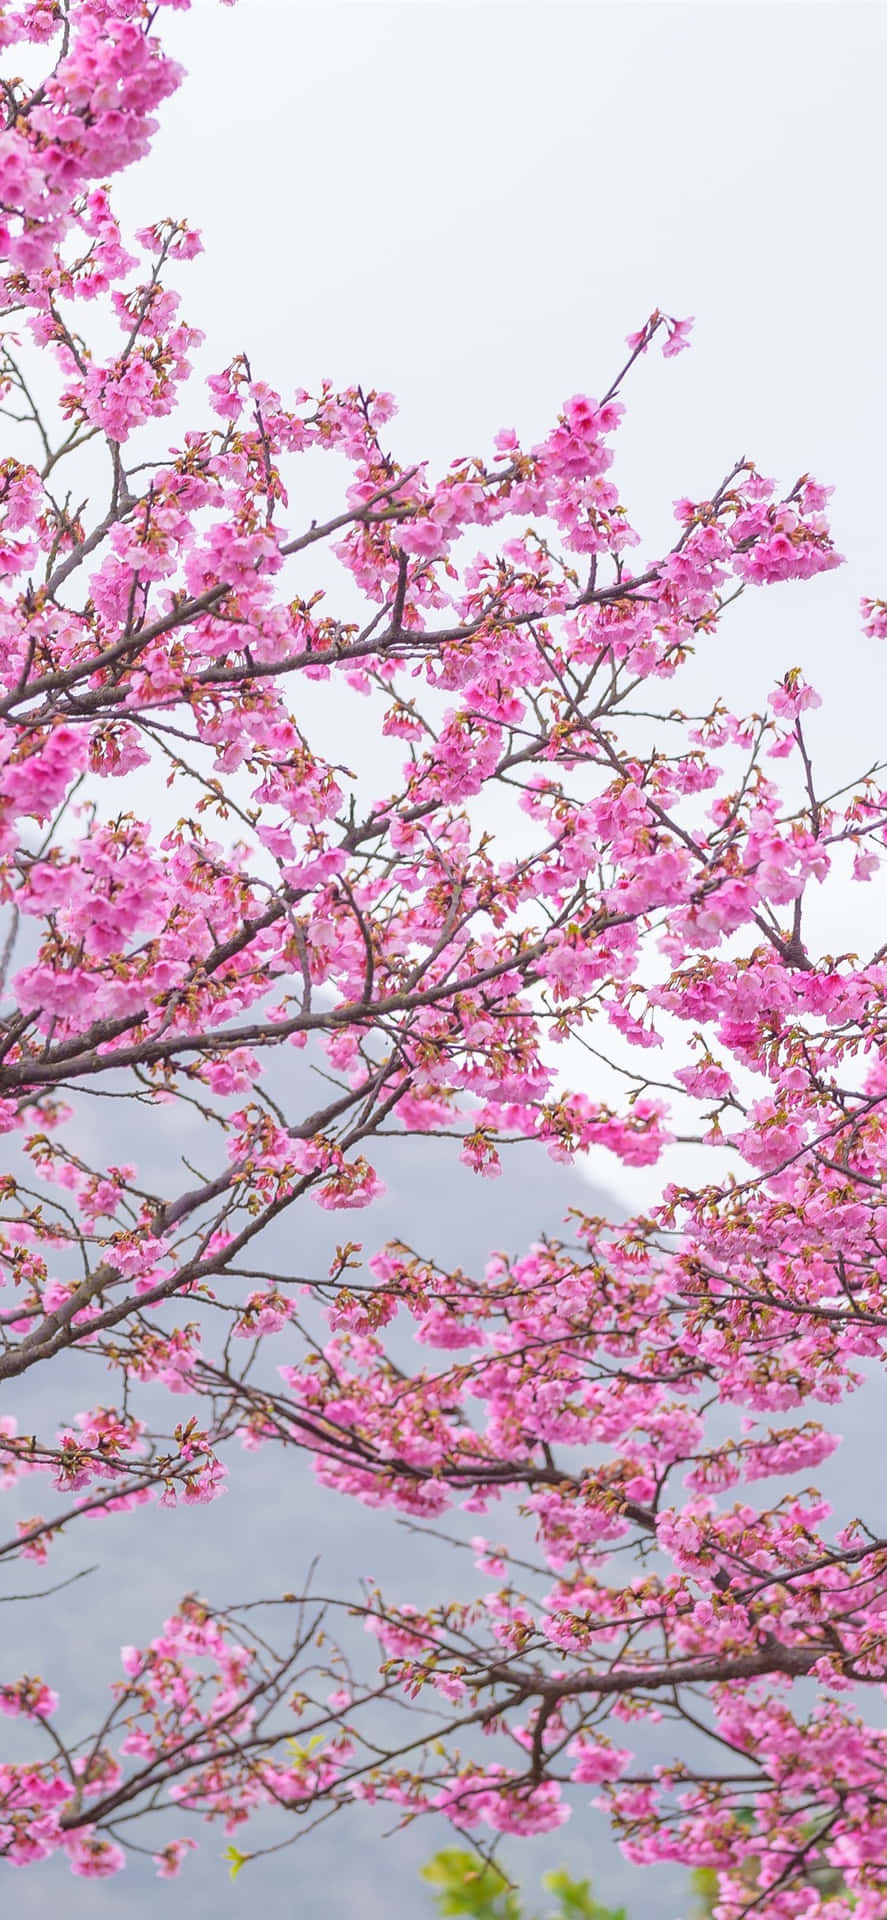 A perfect symbol of beauty and renewal, a pink cherry blossom stands tall in a garden Wallpaper